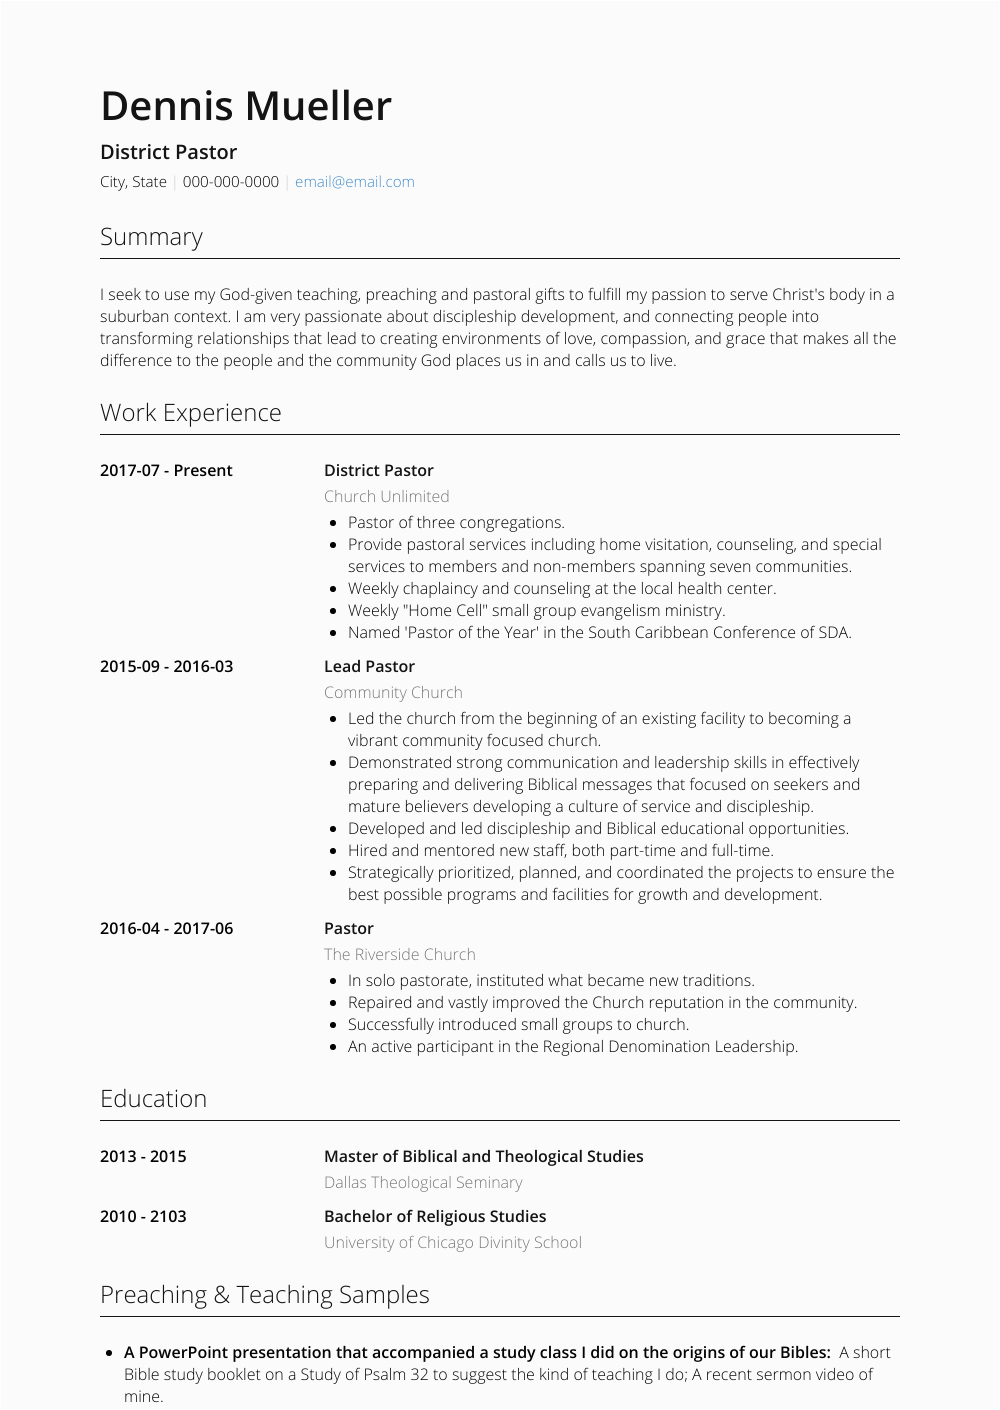 Sample Copy Of A Pastor Resume Lead Pastor Resume Samples and Templates